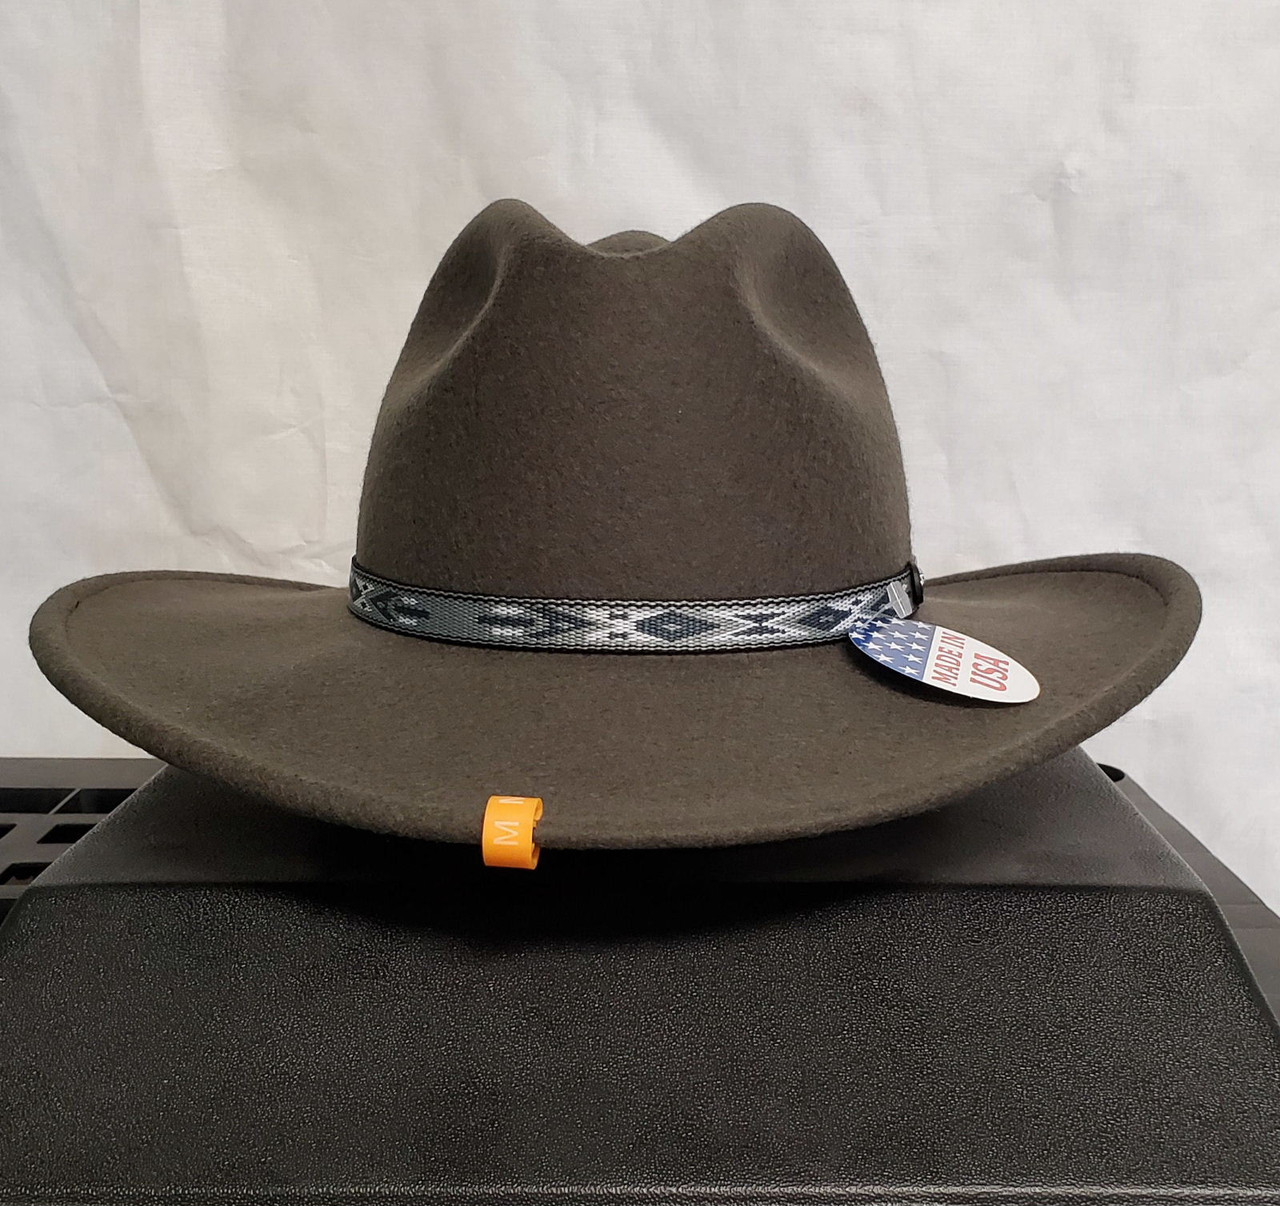 Stetson Granger Crushable 100% Wool Western Hat - One 2 mini Ranch